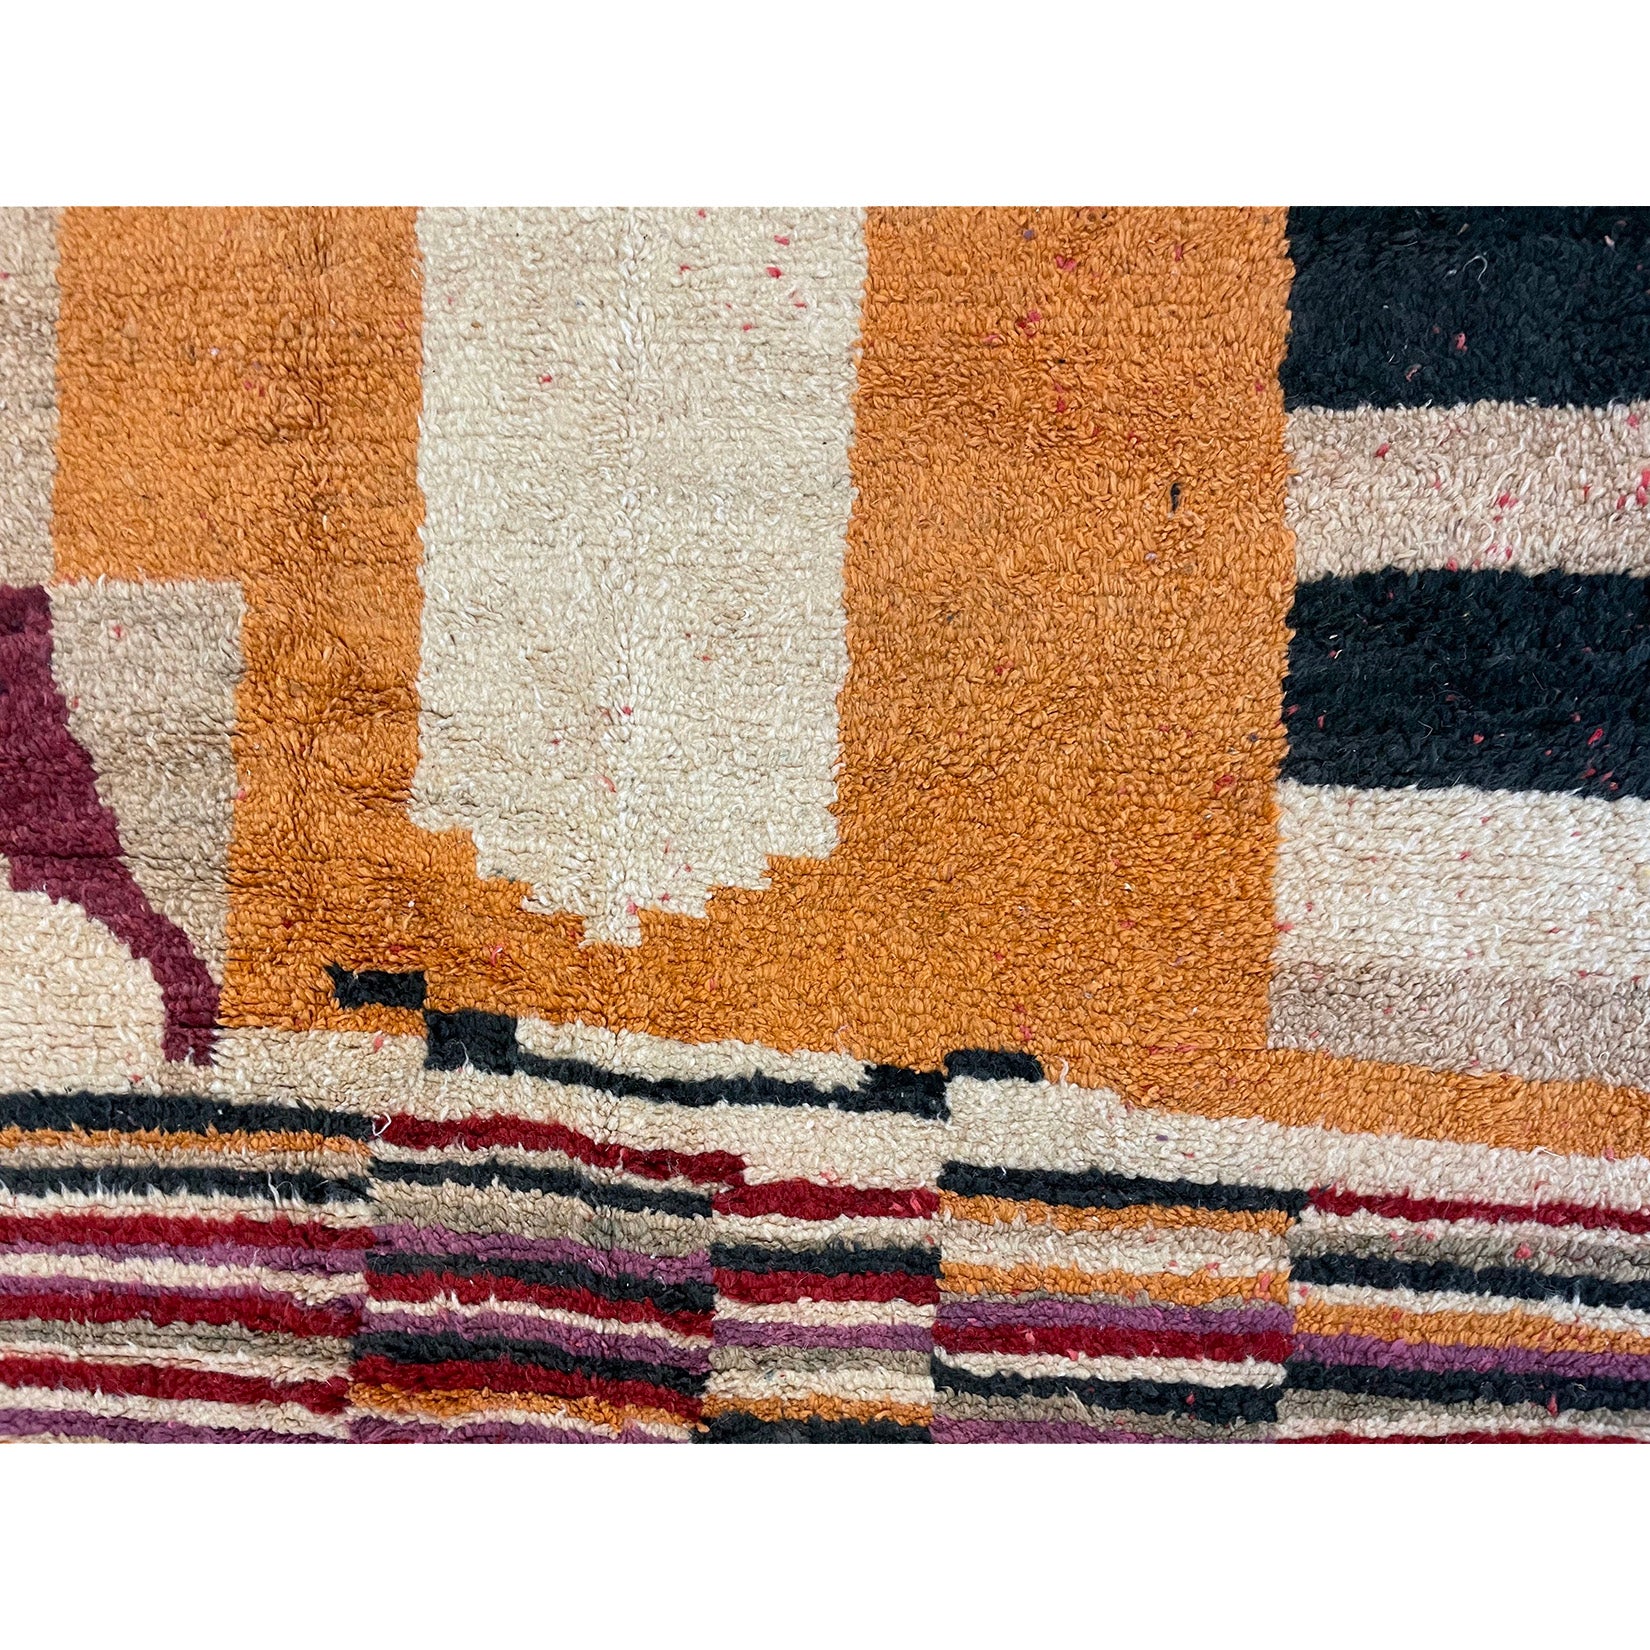 Colorful Moroccan area rug in yellow with abstract design - Kantara | Moroccan Rugs